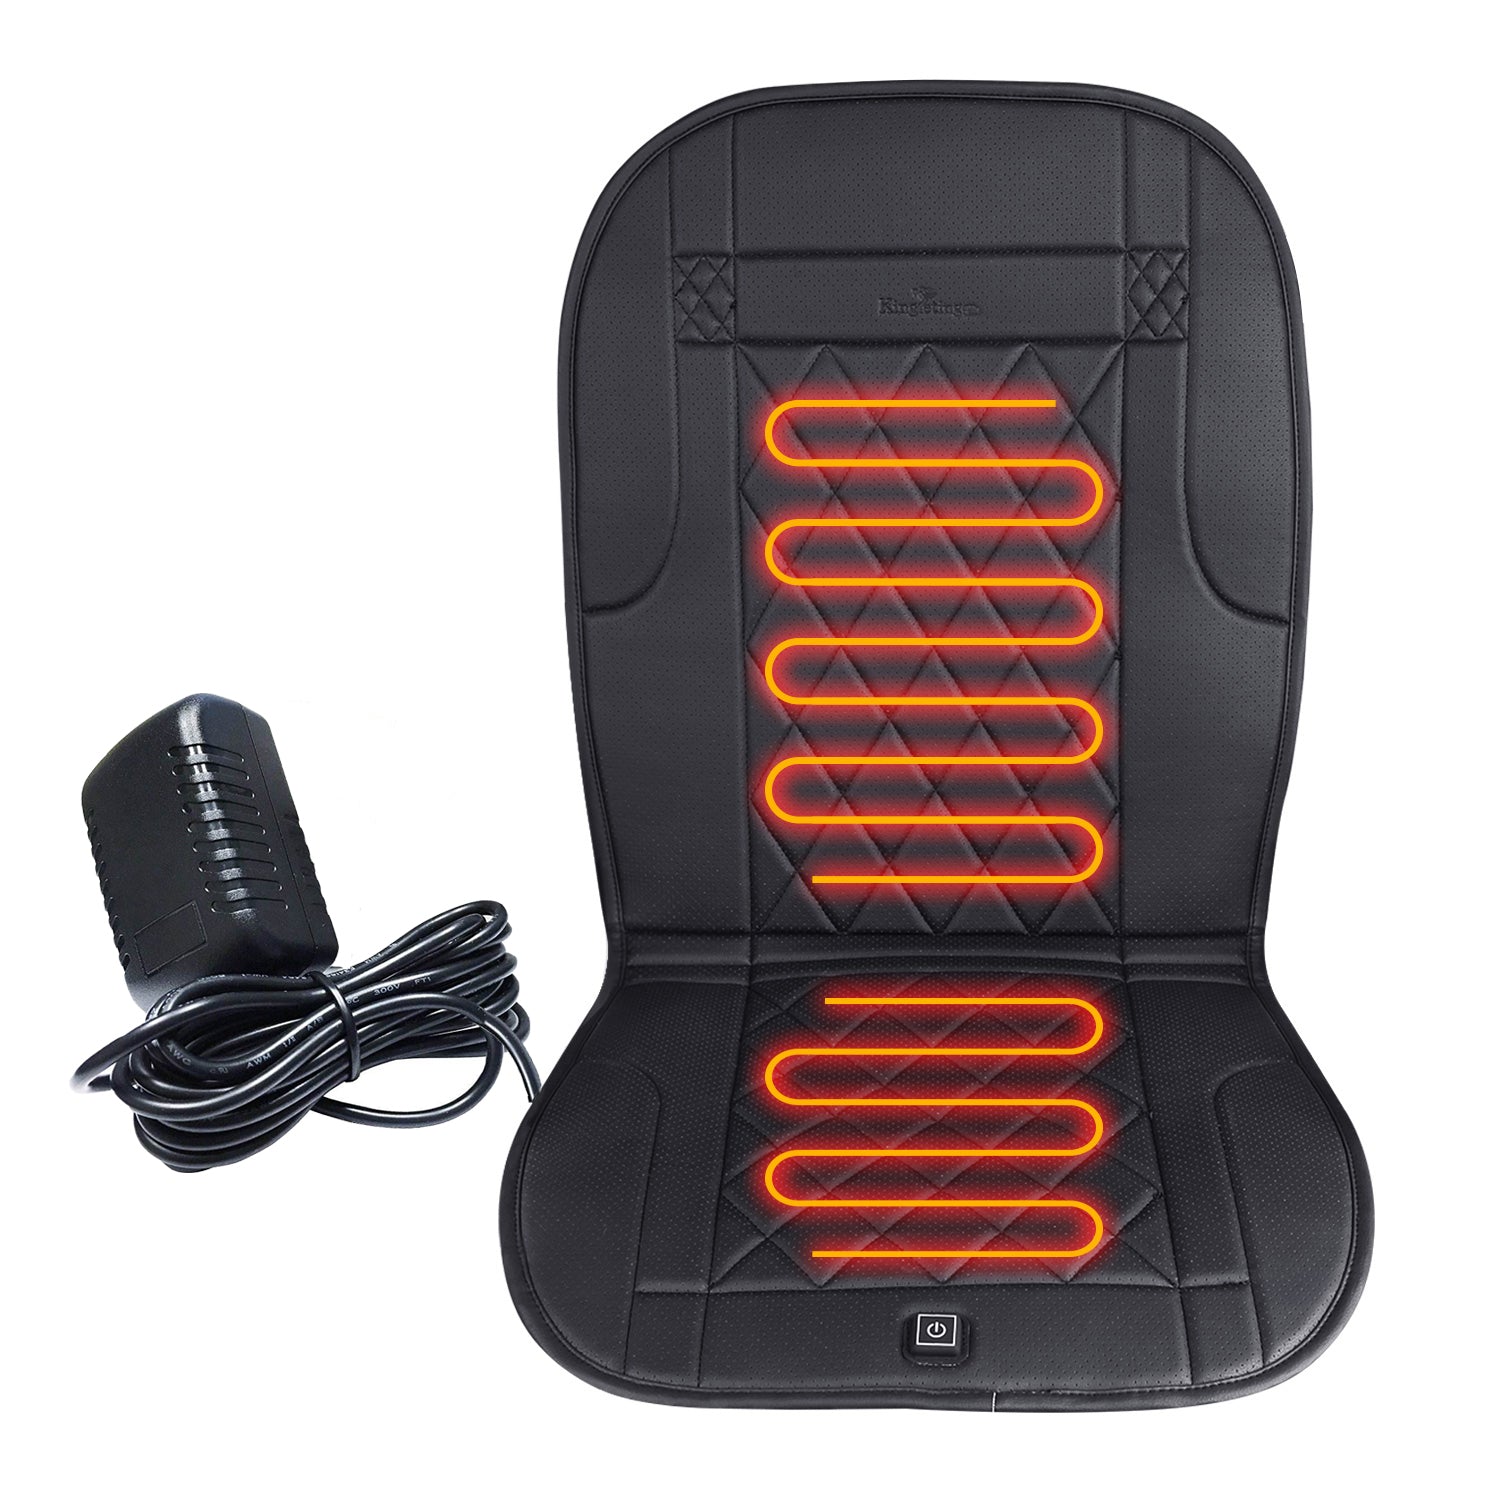 KINGLETING Heated Seat Cushion with Pressure Sensitive Switch, Heat Seat  Cover for Home, Office Chair and More(Back and Seat)